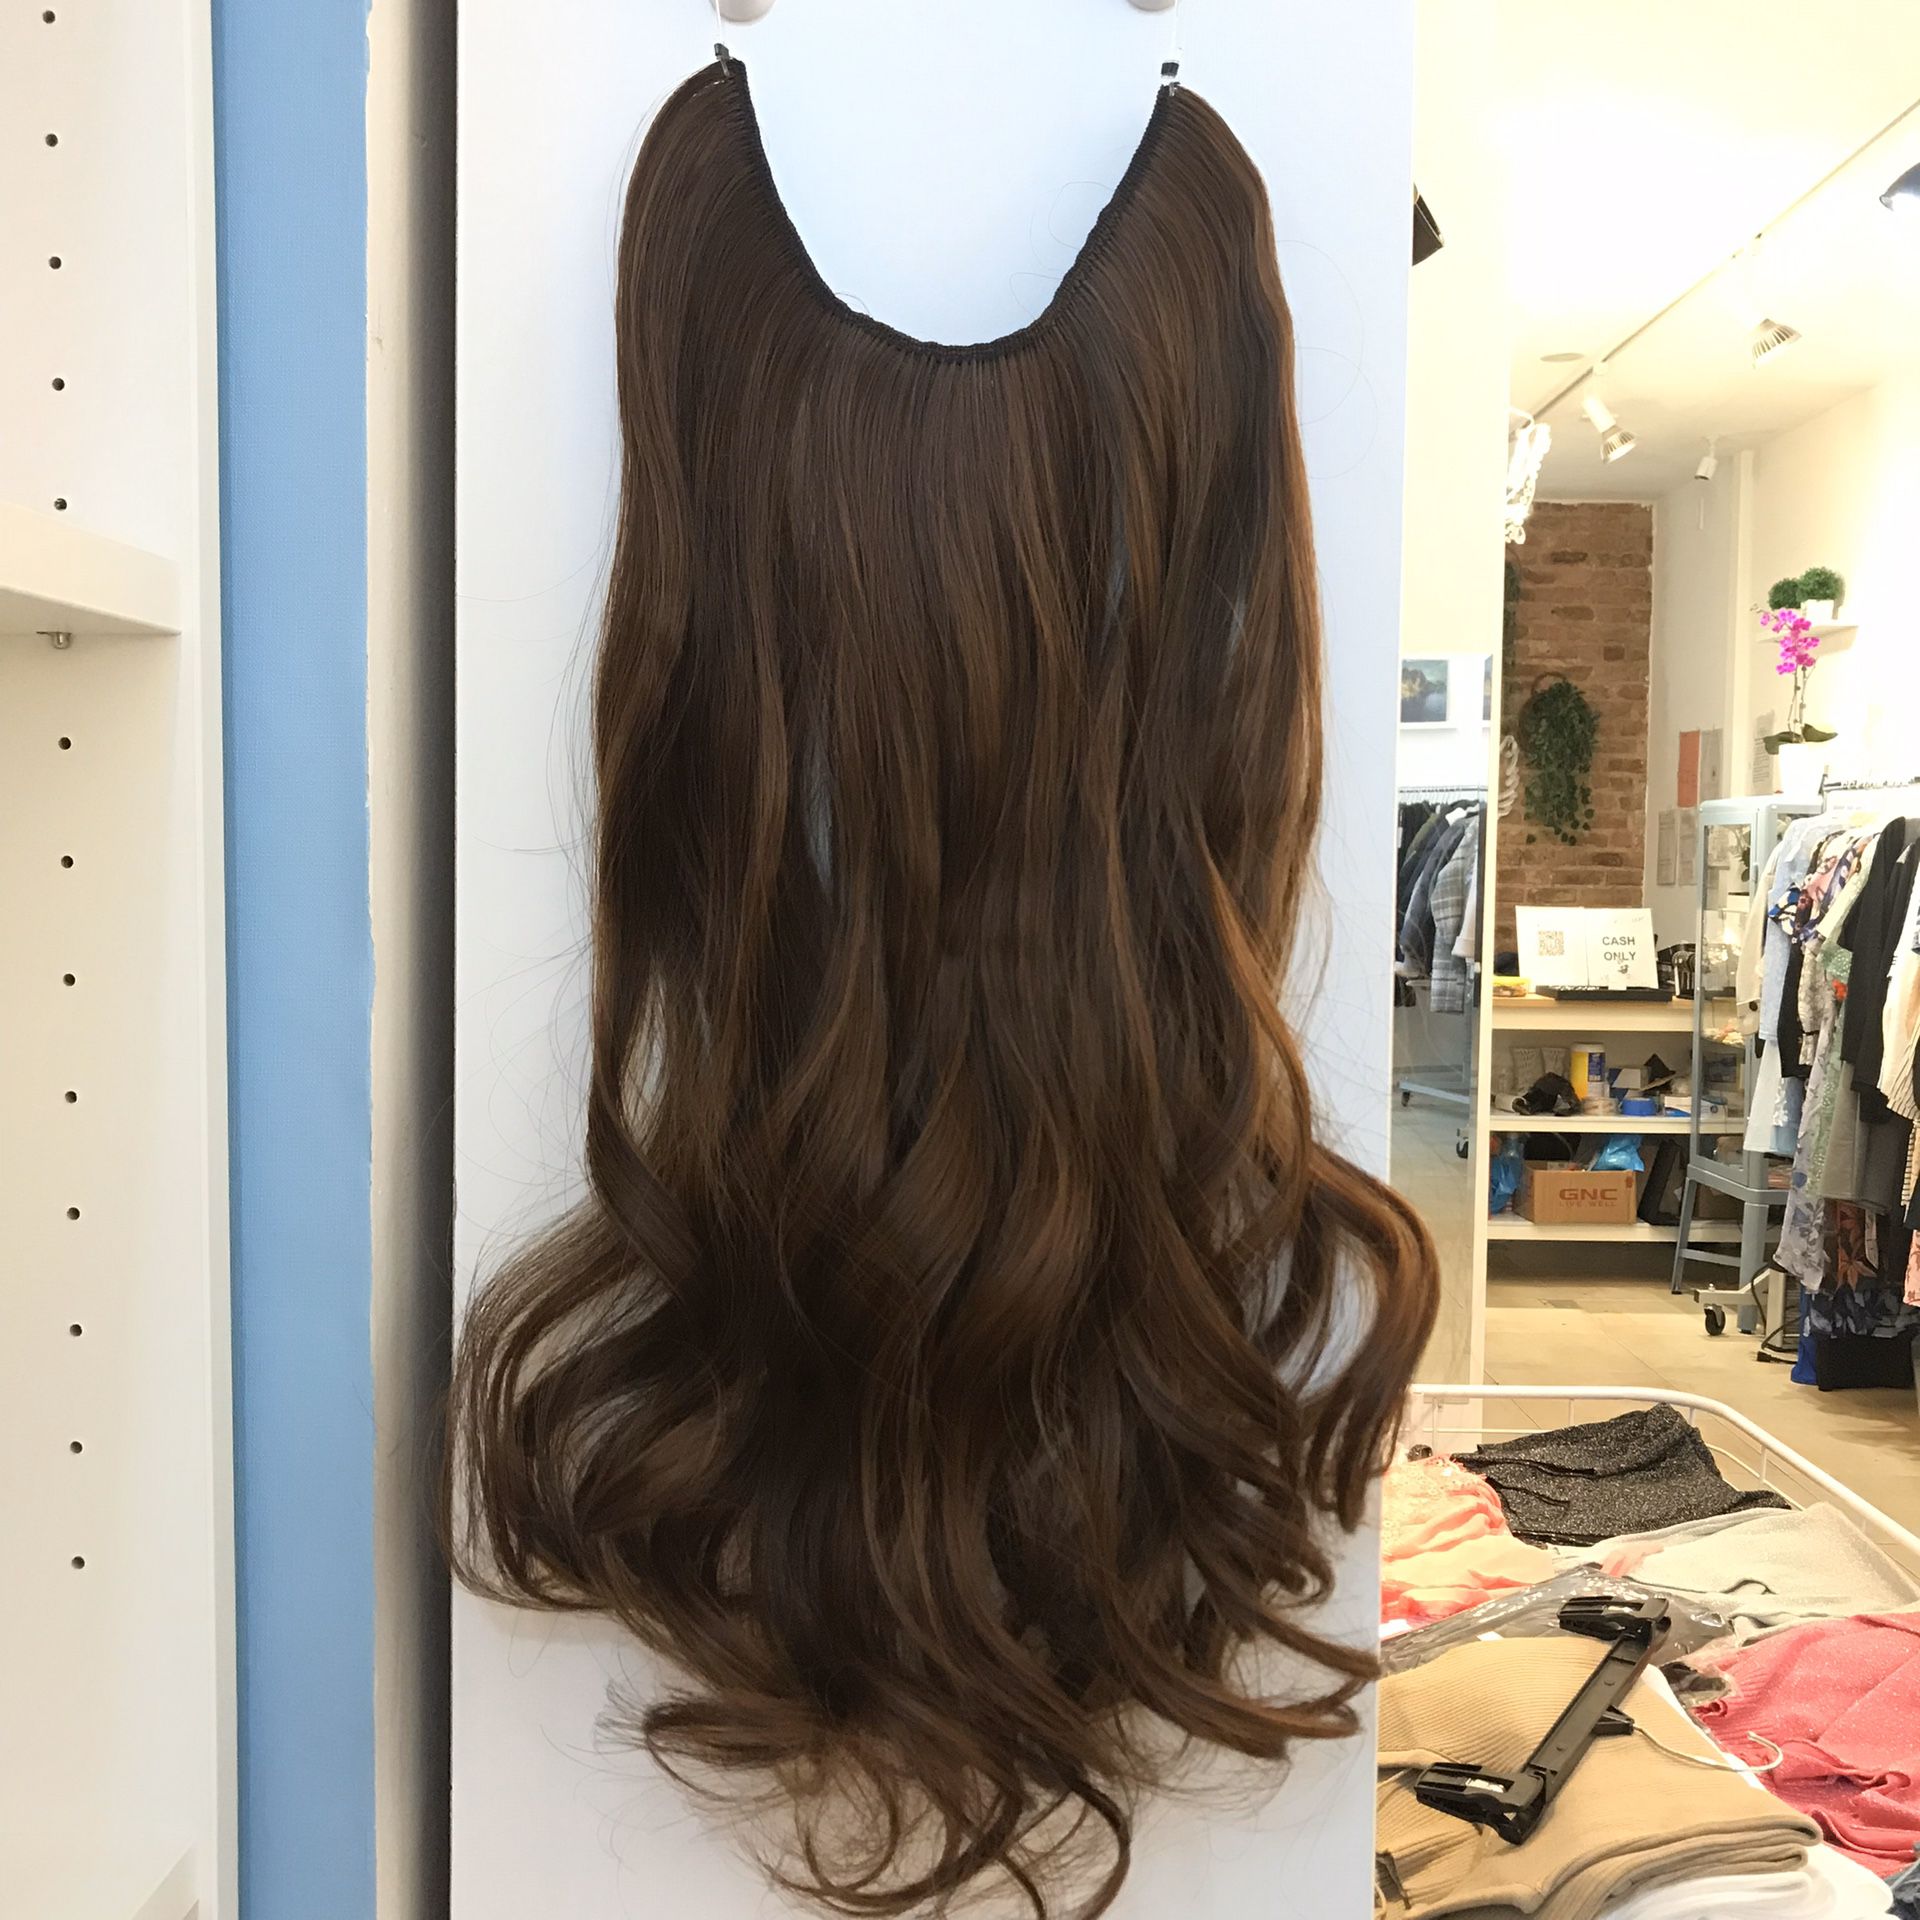 24” Fish line band hair extensions